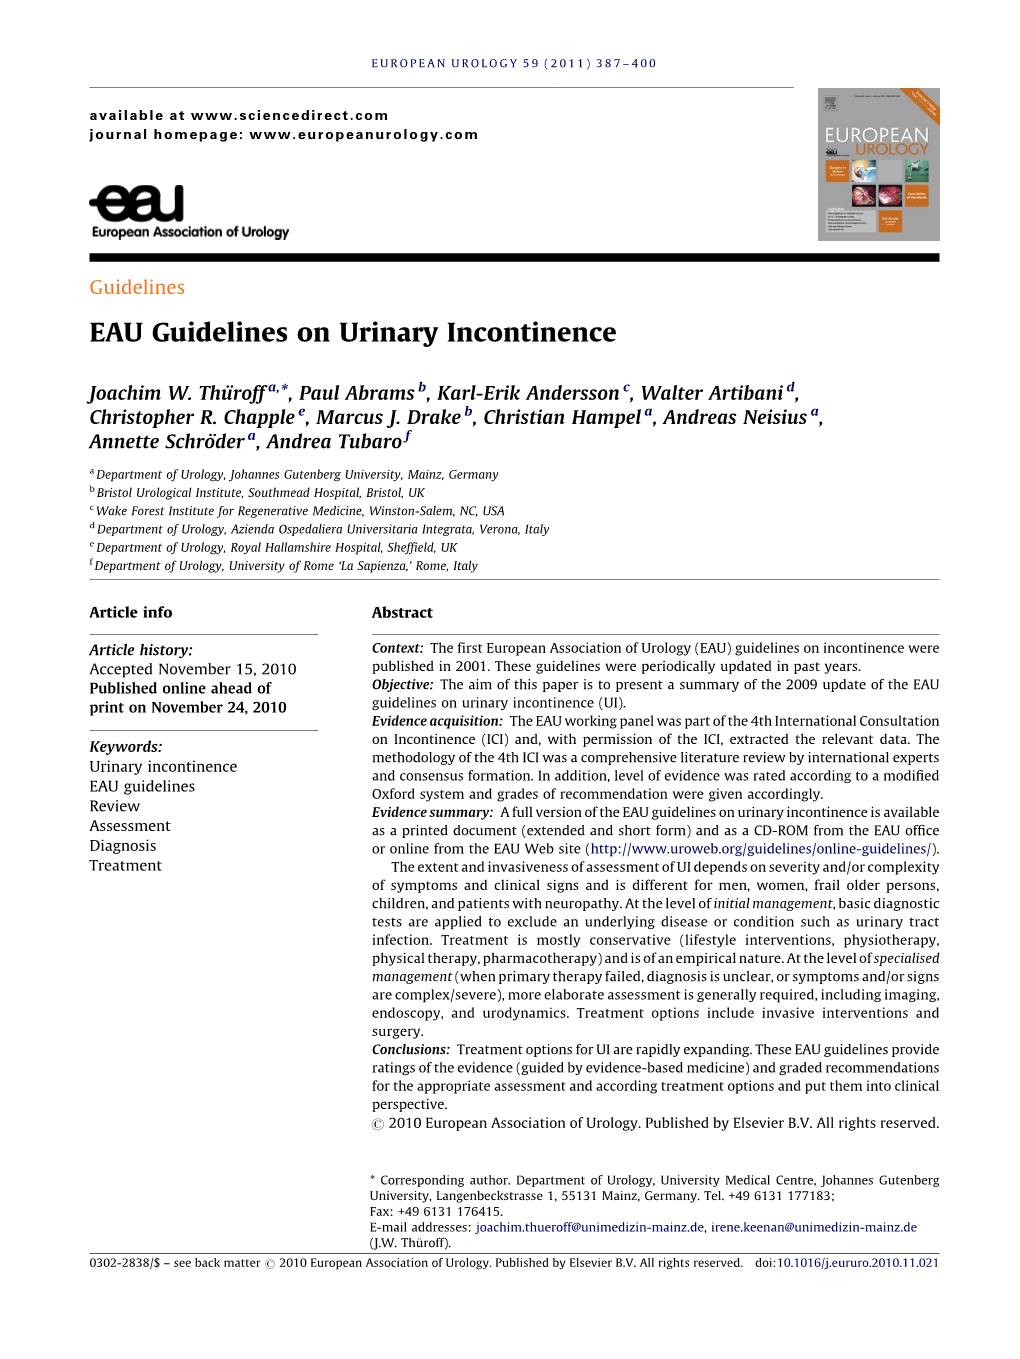 EAU Guidelines on Urinary Incontinence